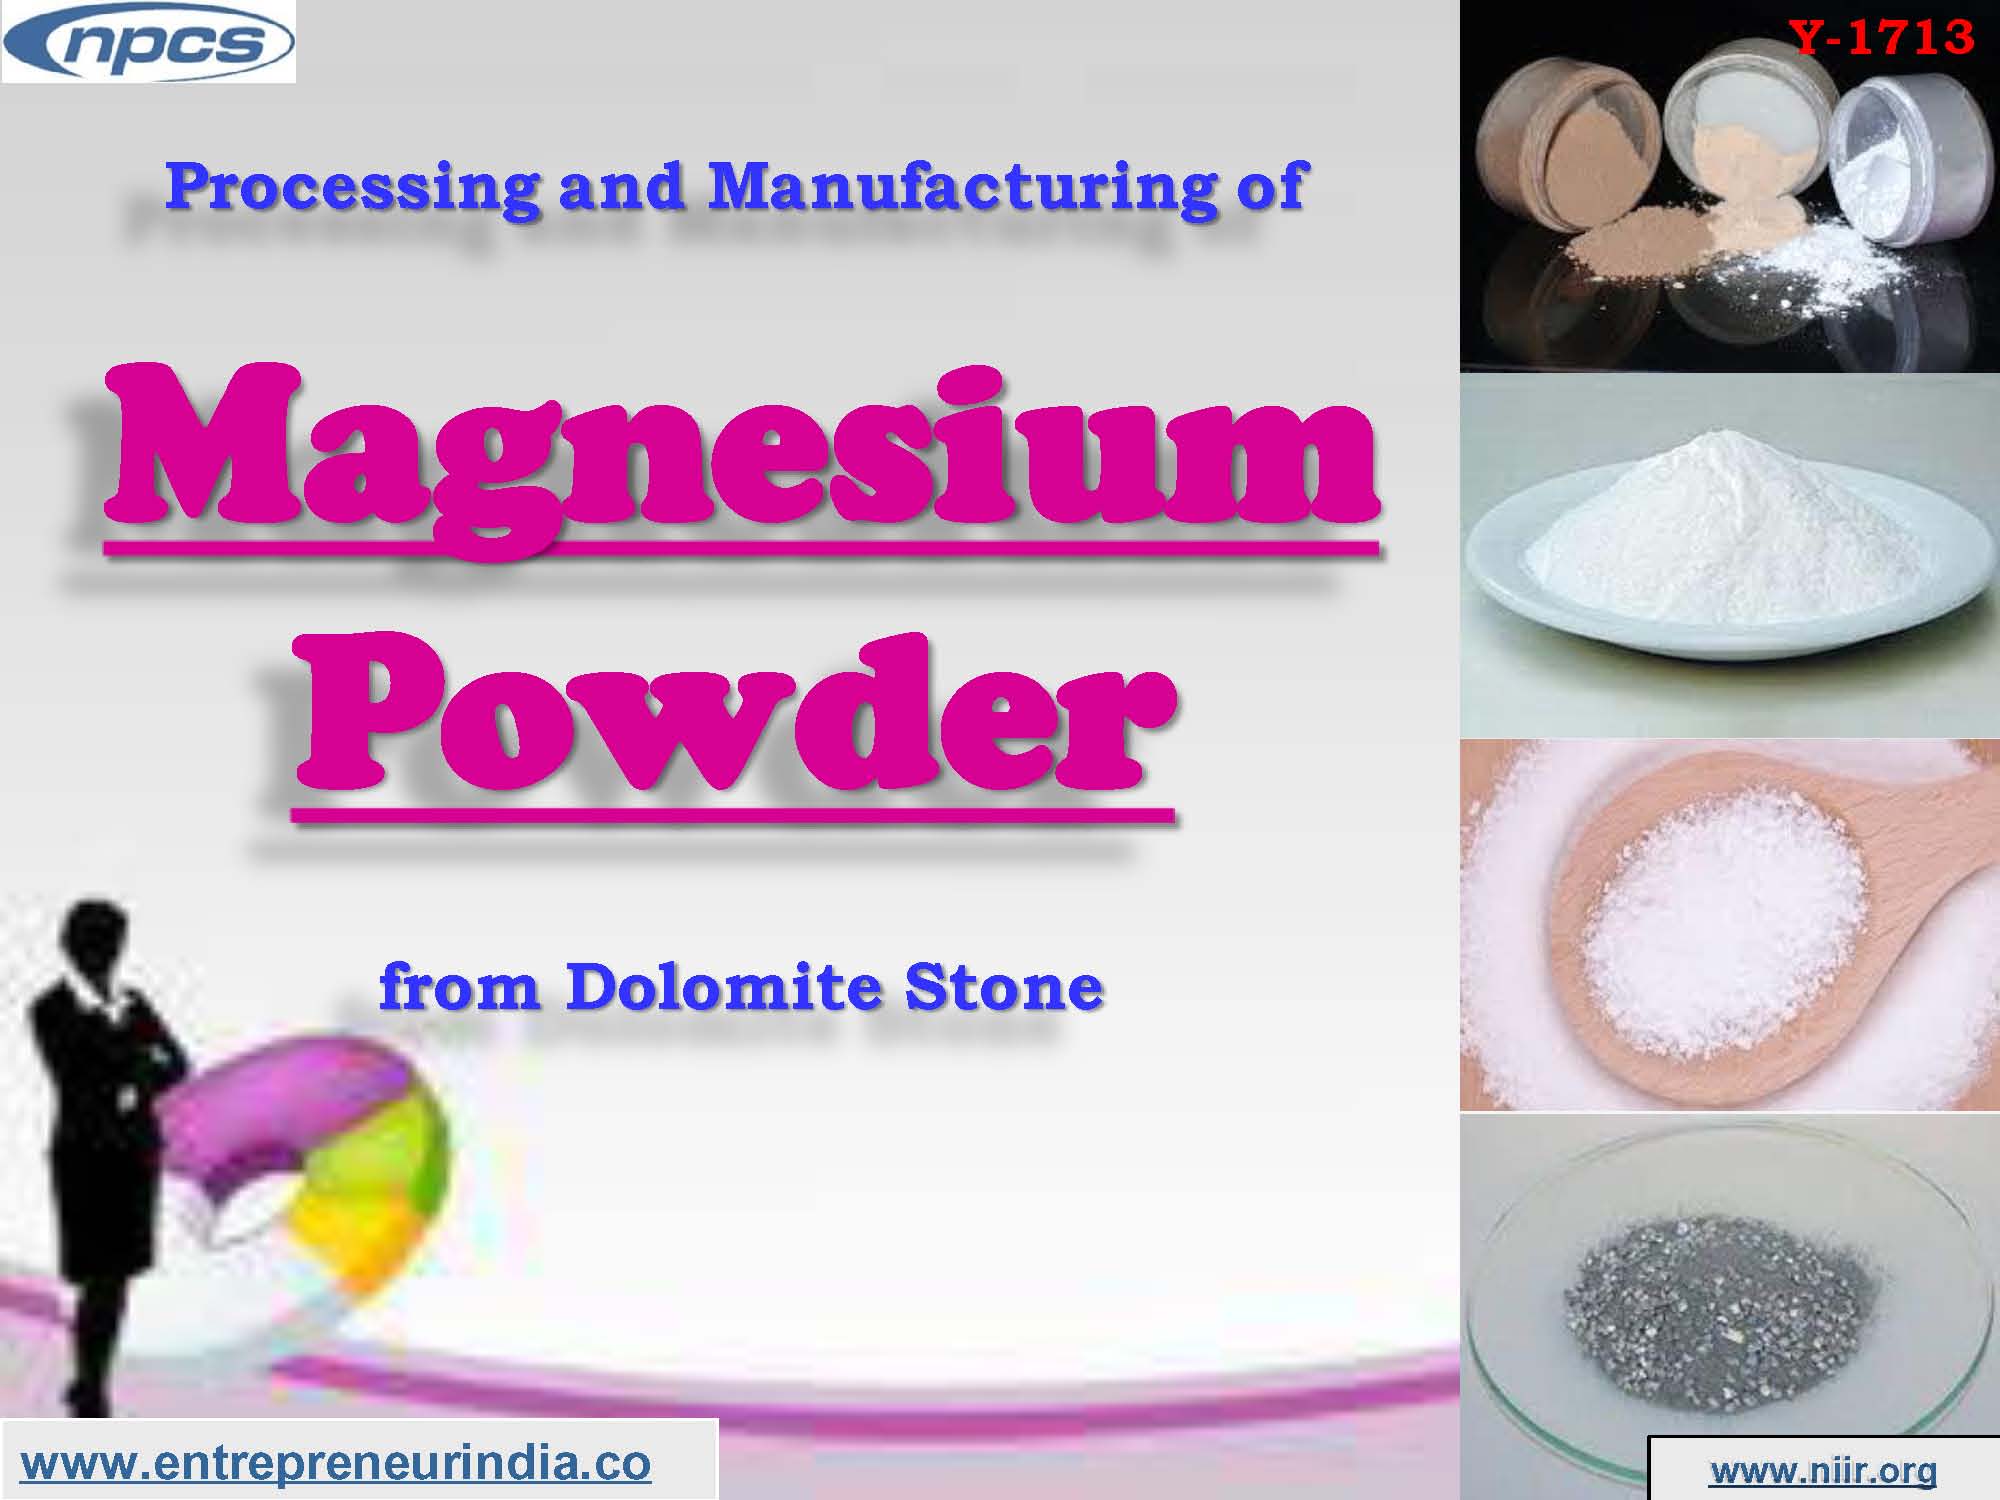 Processing and Manufacturing of Magnesium Powder from Dolomite Stone